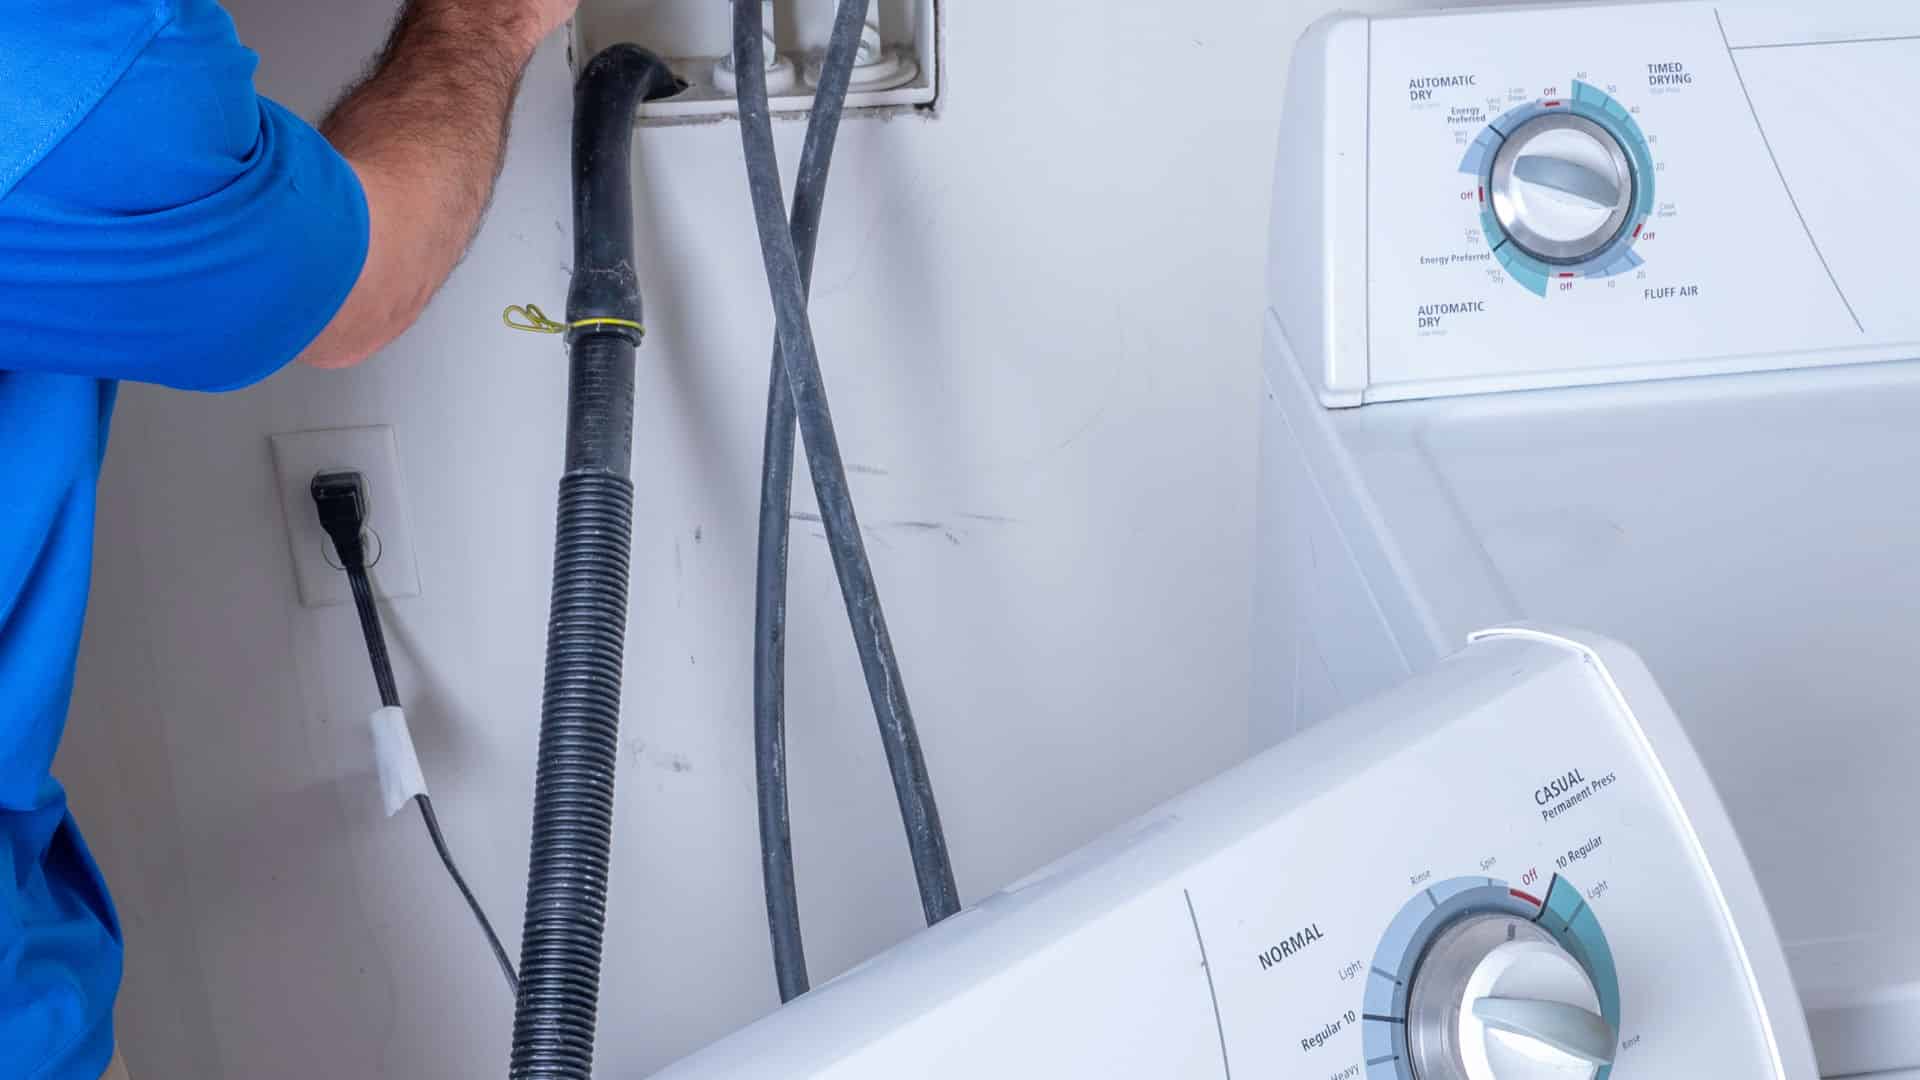 How To Install Plumbing For A Washing Machine